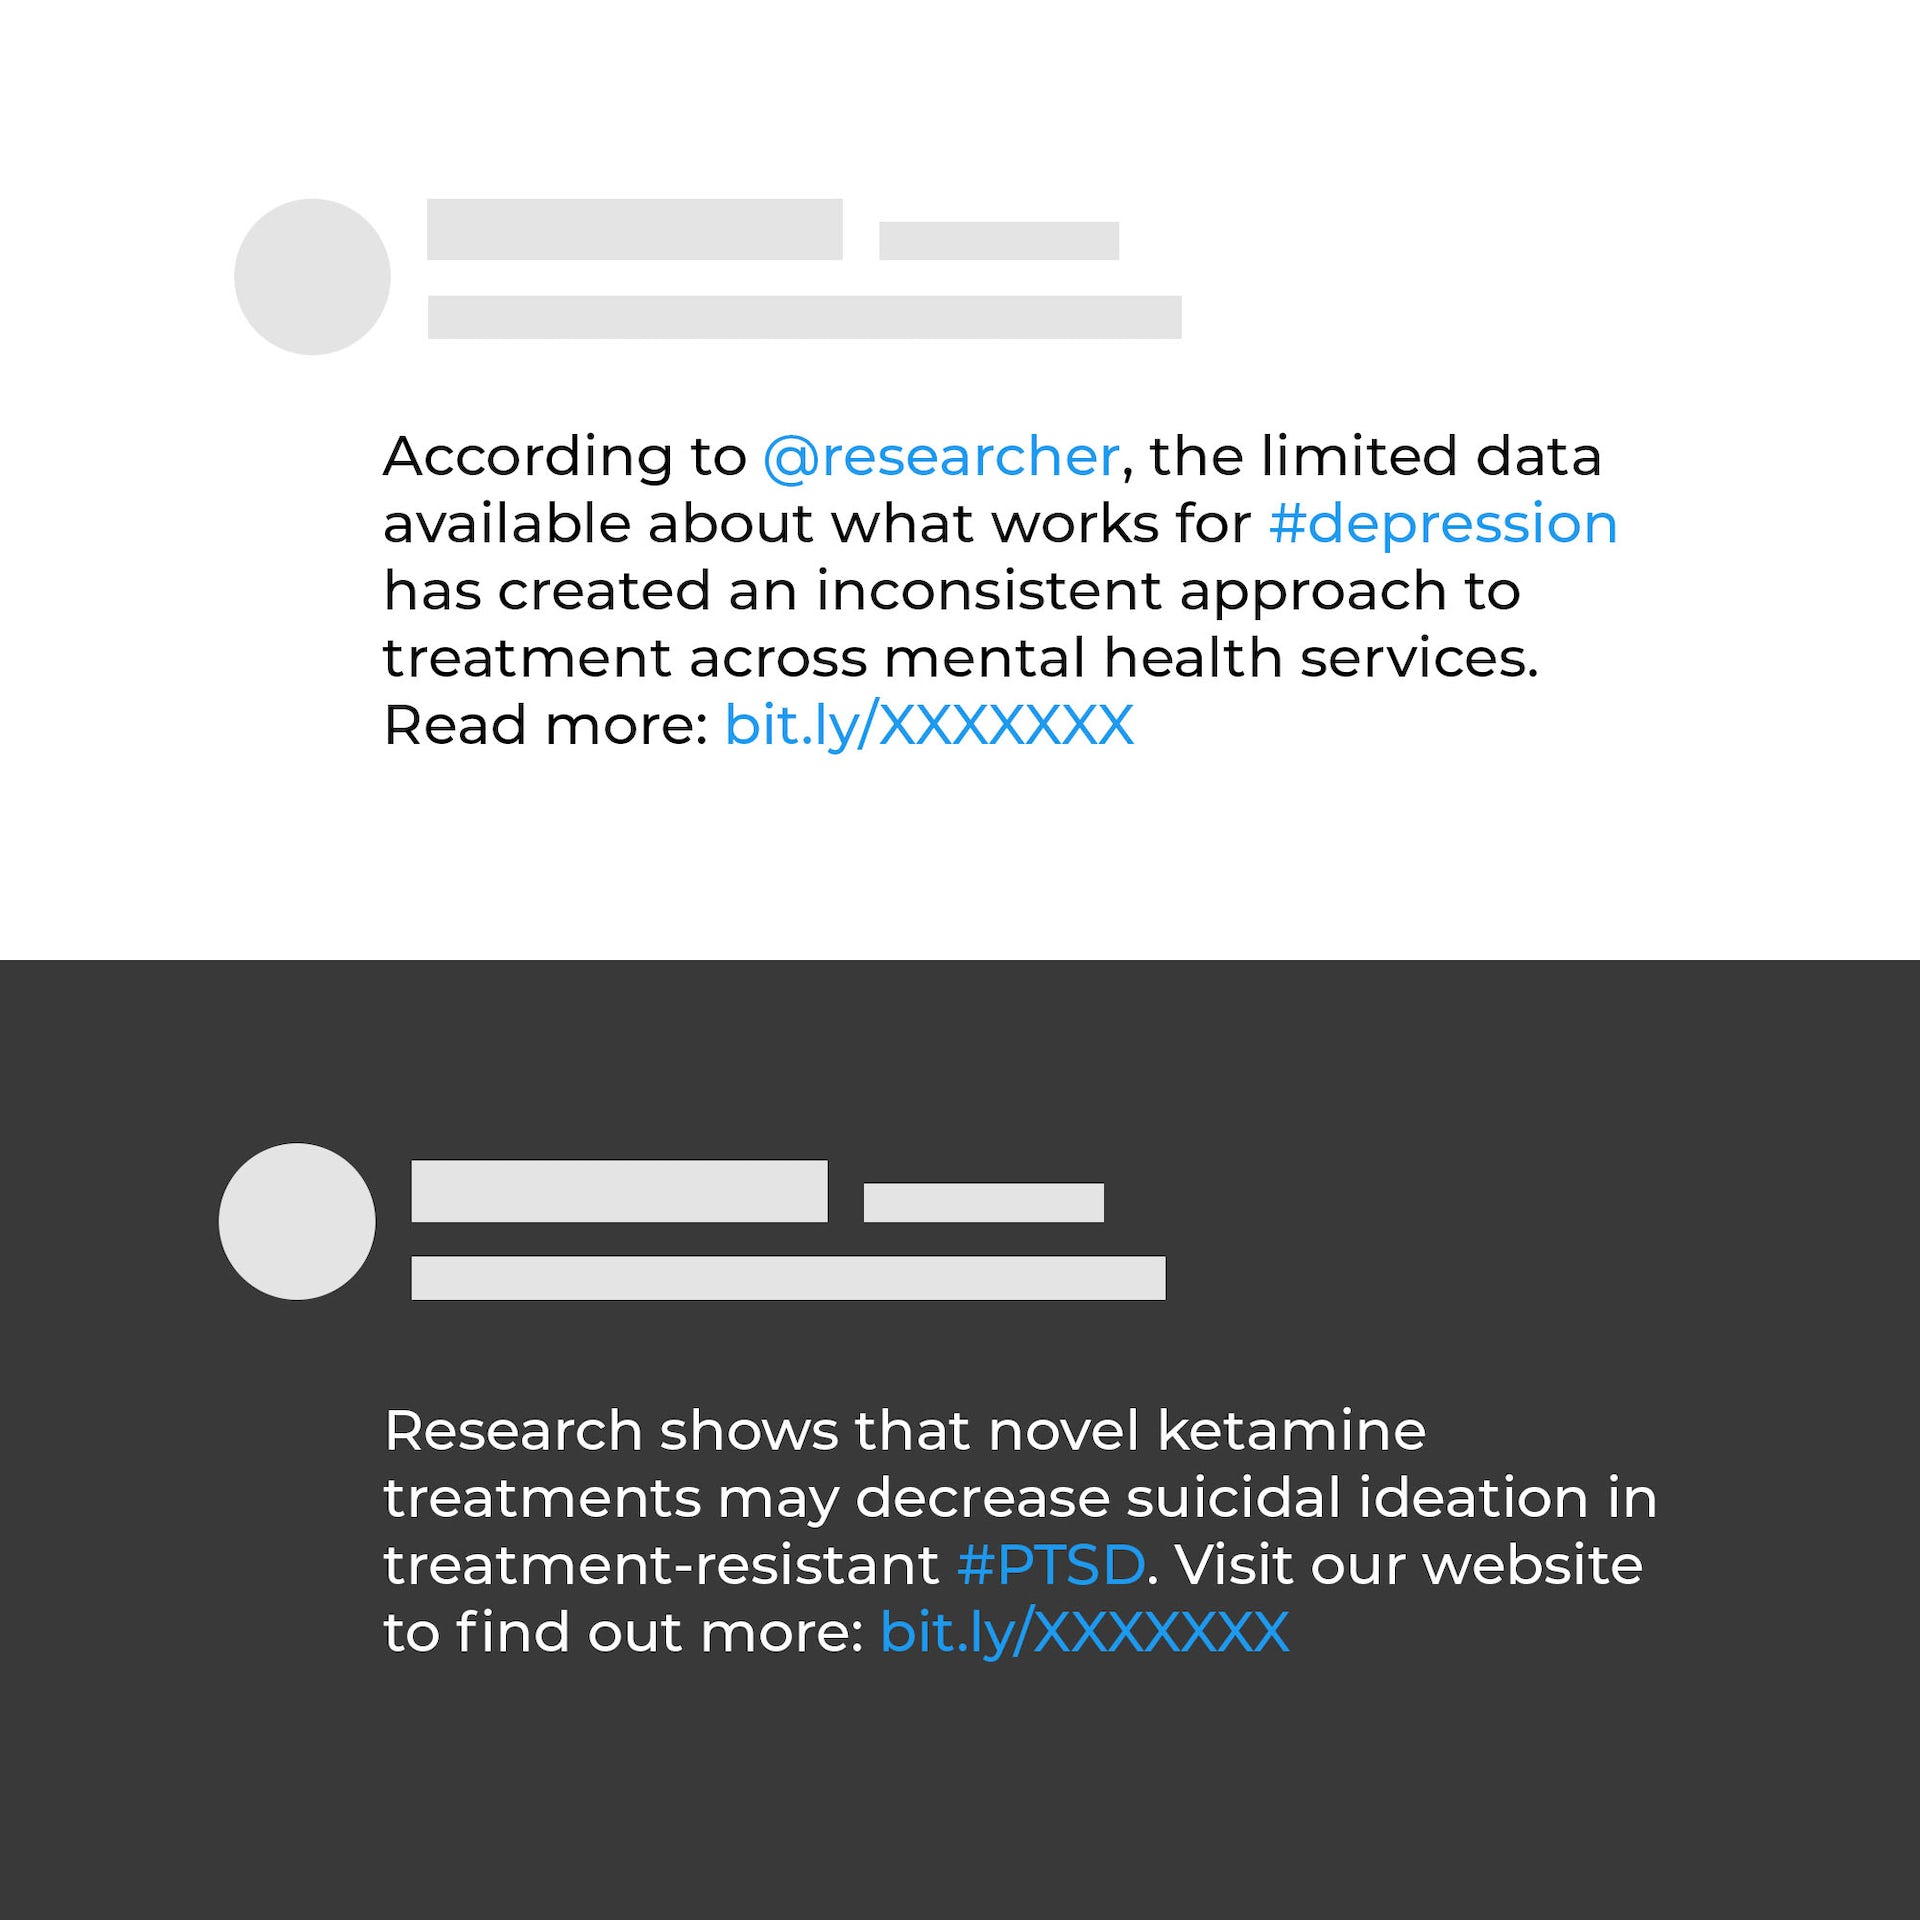 Additional examples of fake X posts on mental health research where the evidence-basis of the information is not clearly communicated in the post.